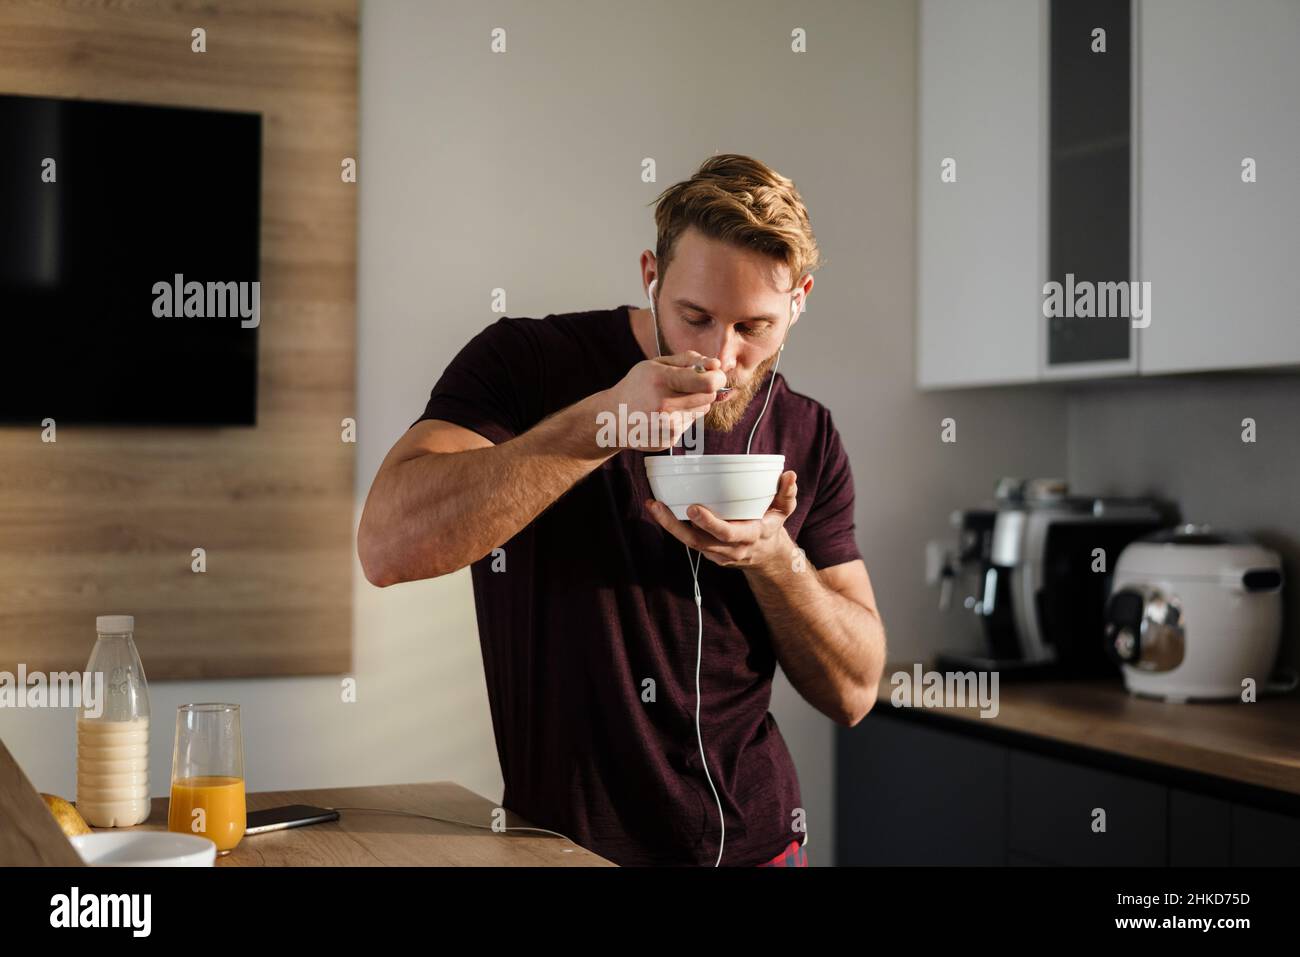 Attractive healthy young man having tasty breakfast while standing in the kitchen, holding bowl, listening to music with earphones Stock Photo